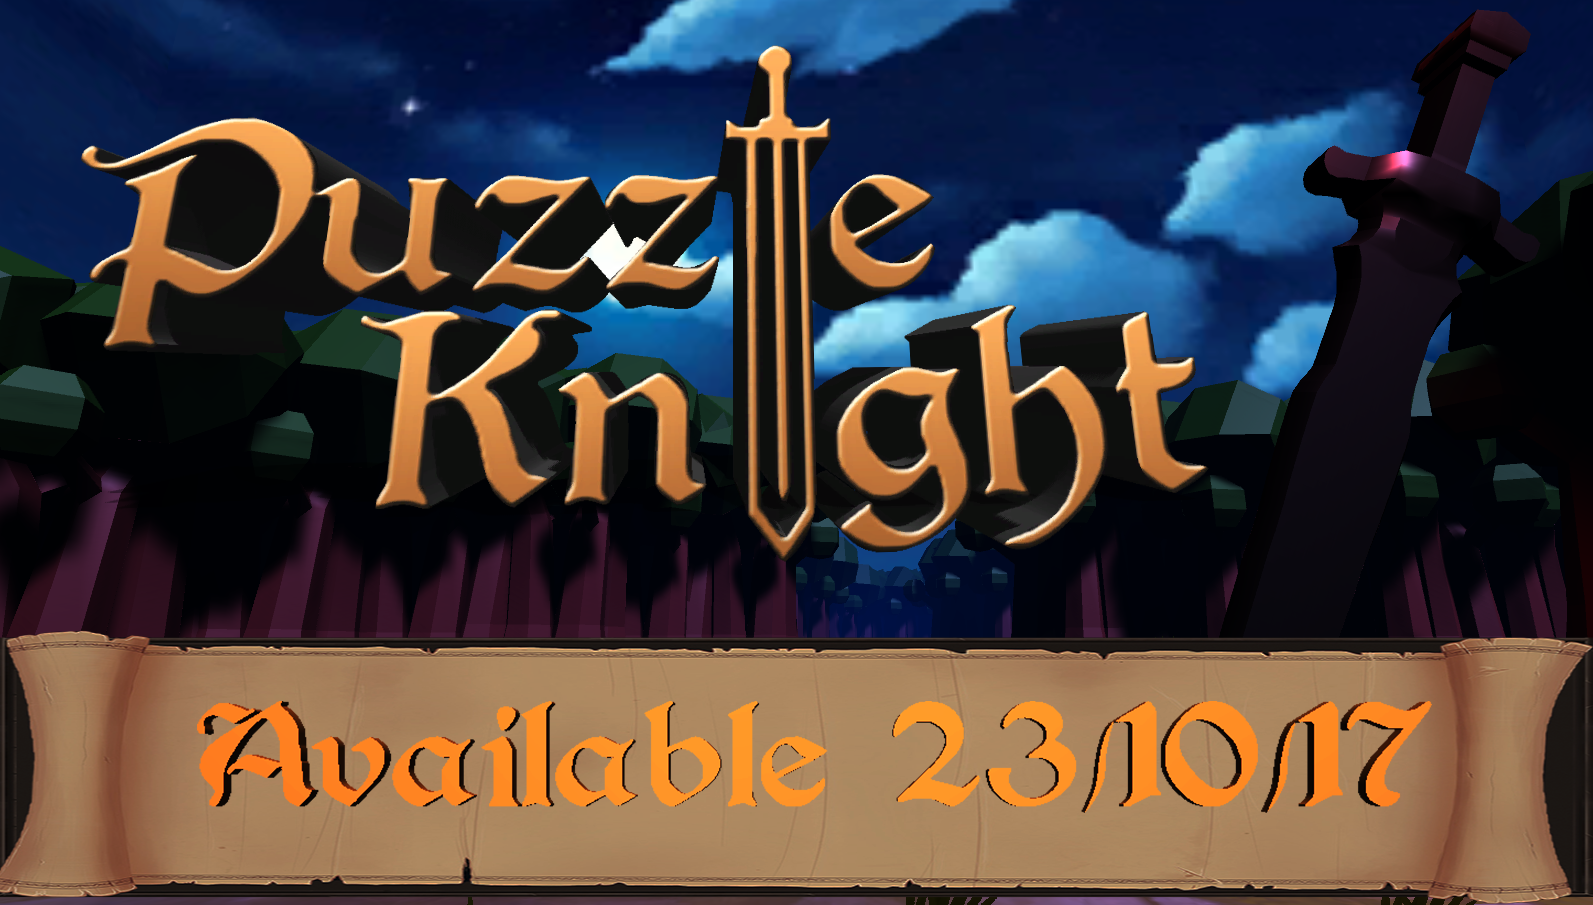 Puzzle Knight Release Date